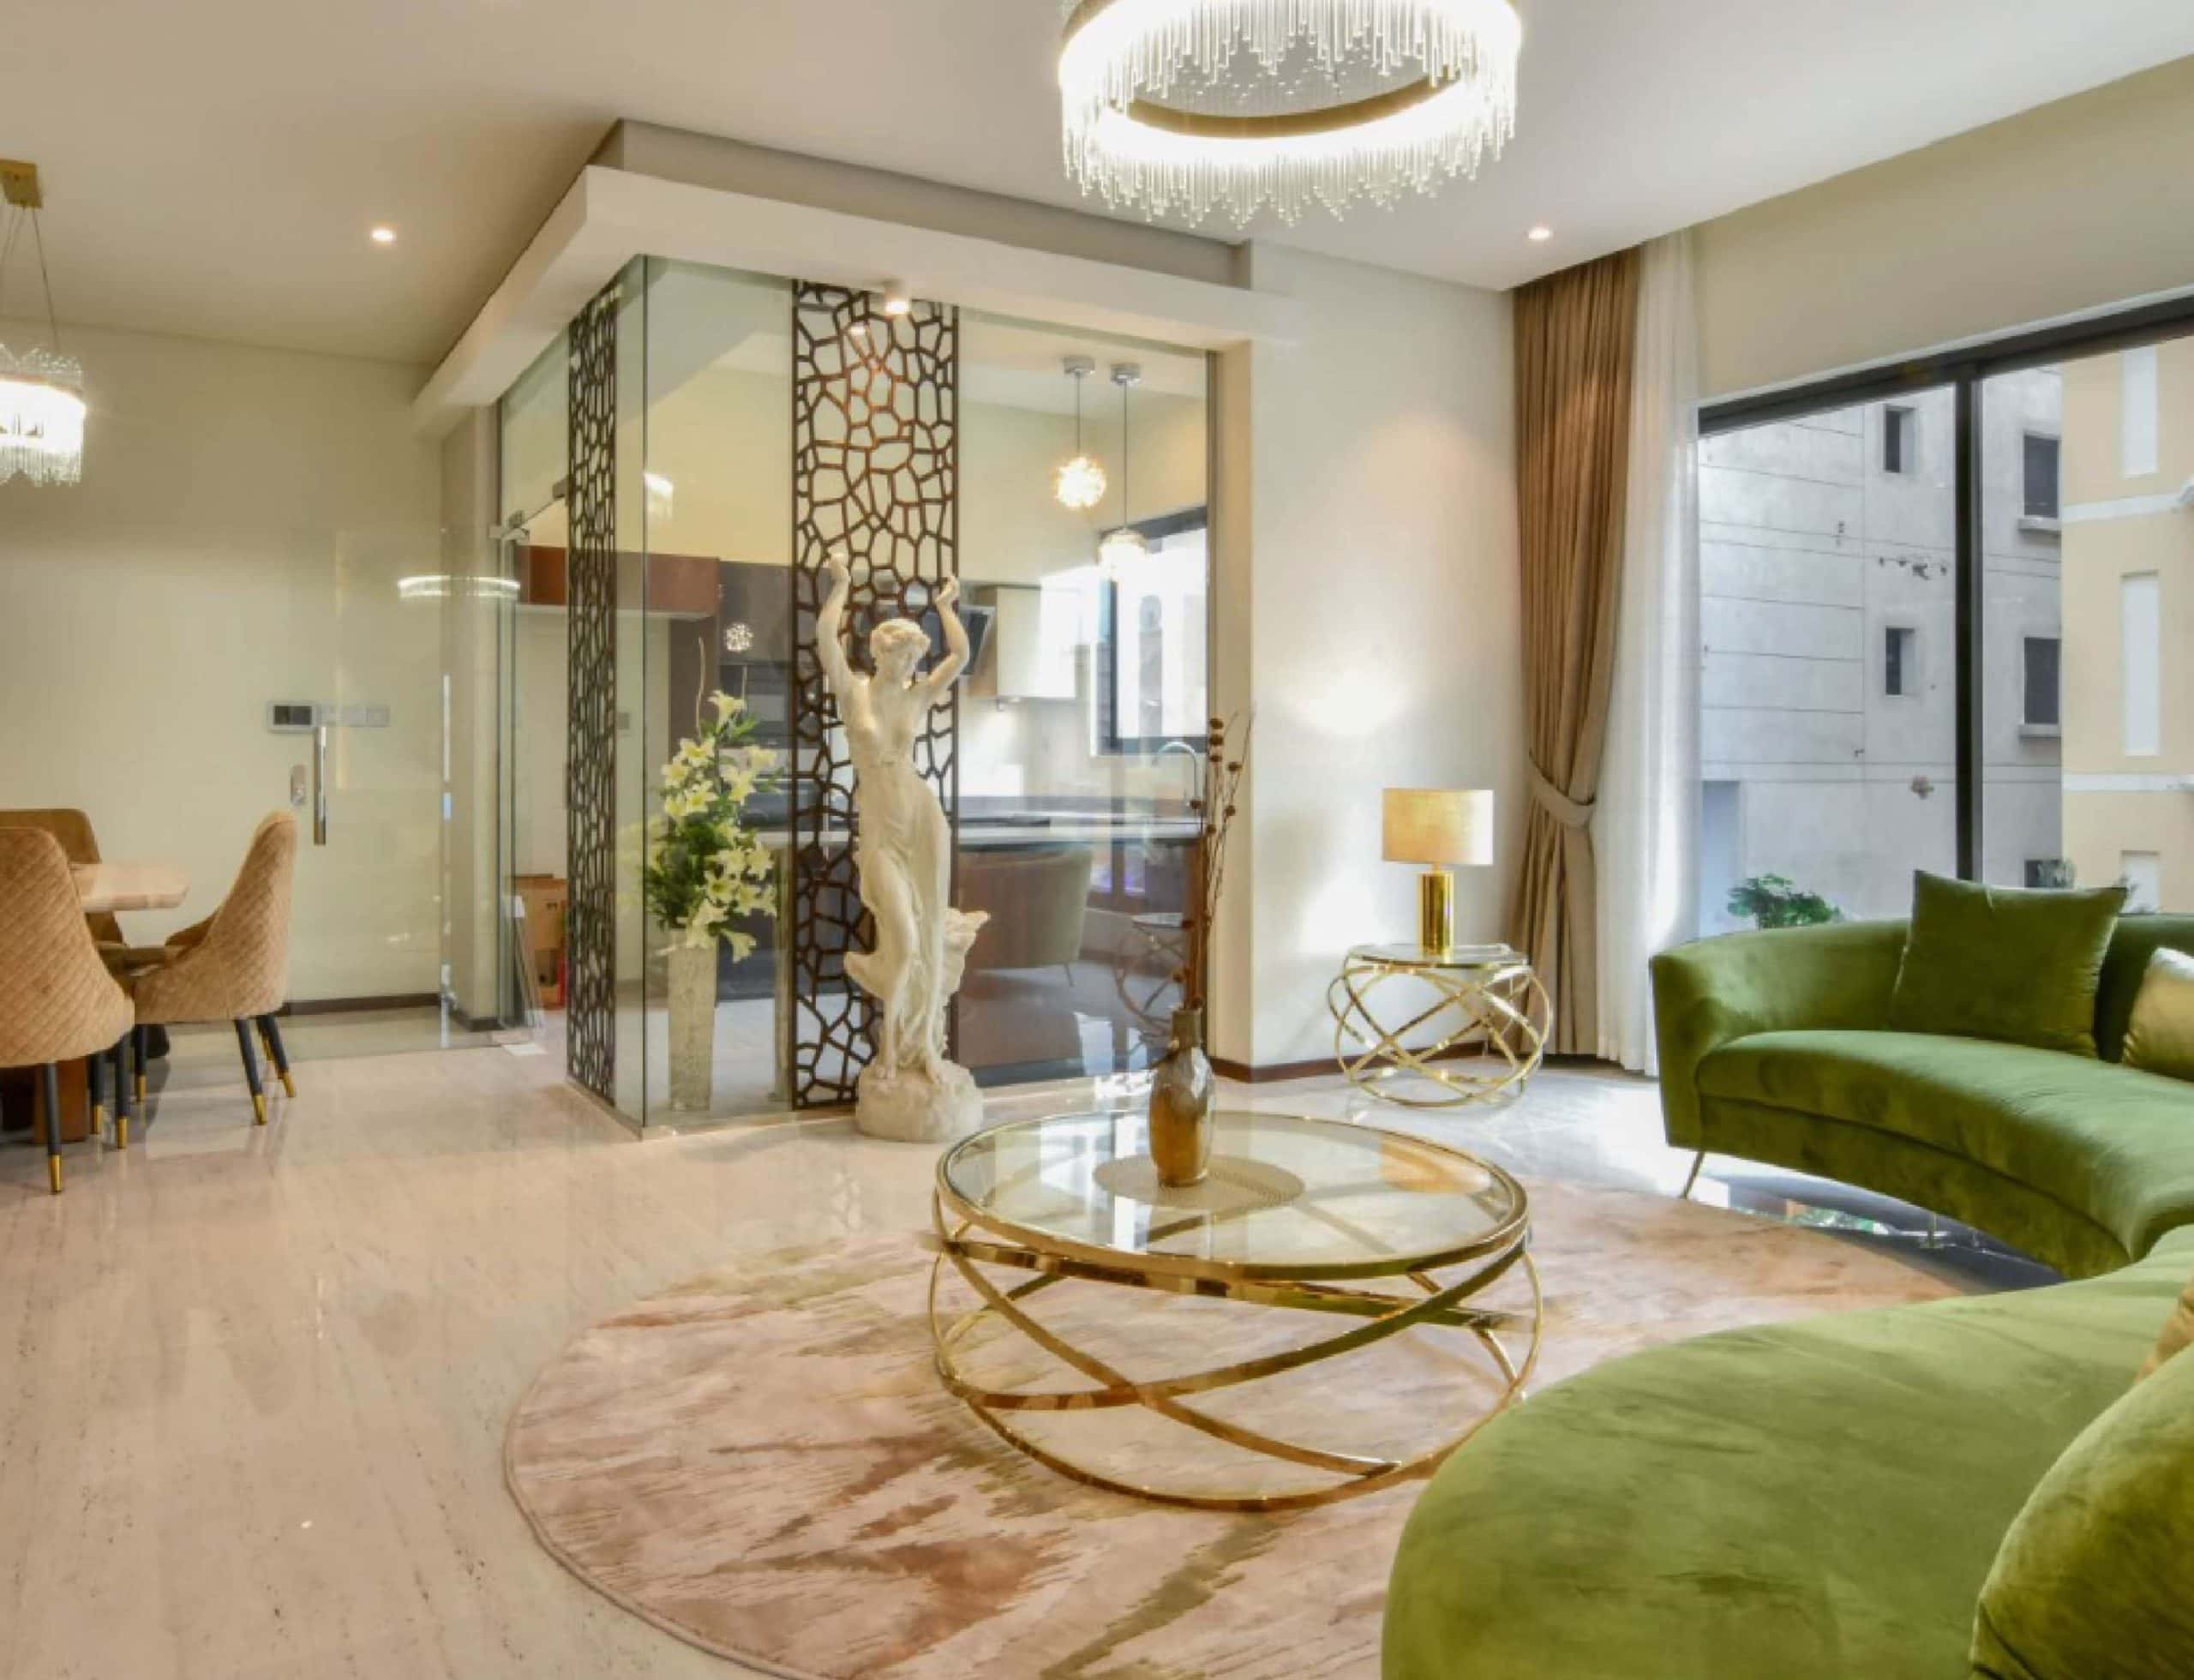 House Me Bahrain company is the us-based real estate business for finding rented accommodations, offering a wide selection of houses including a living room with green couches and a glass table.